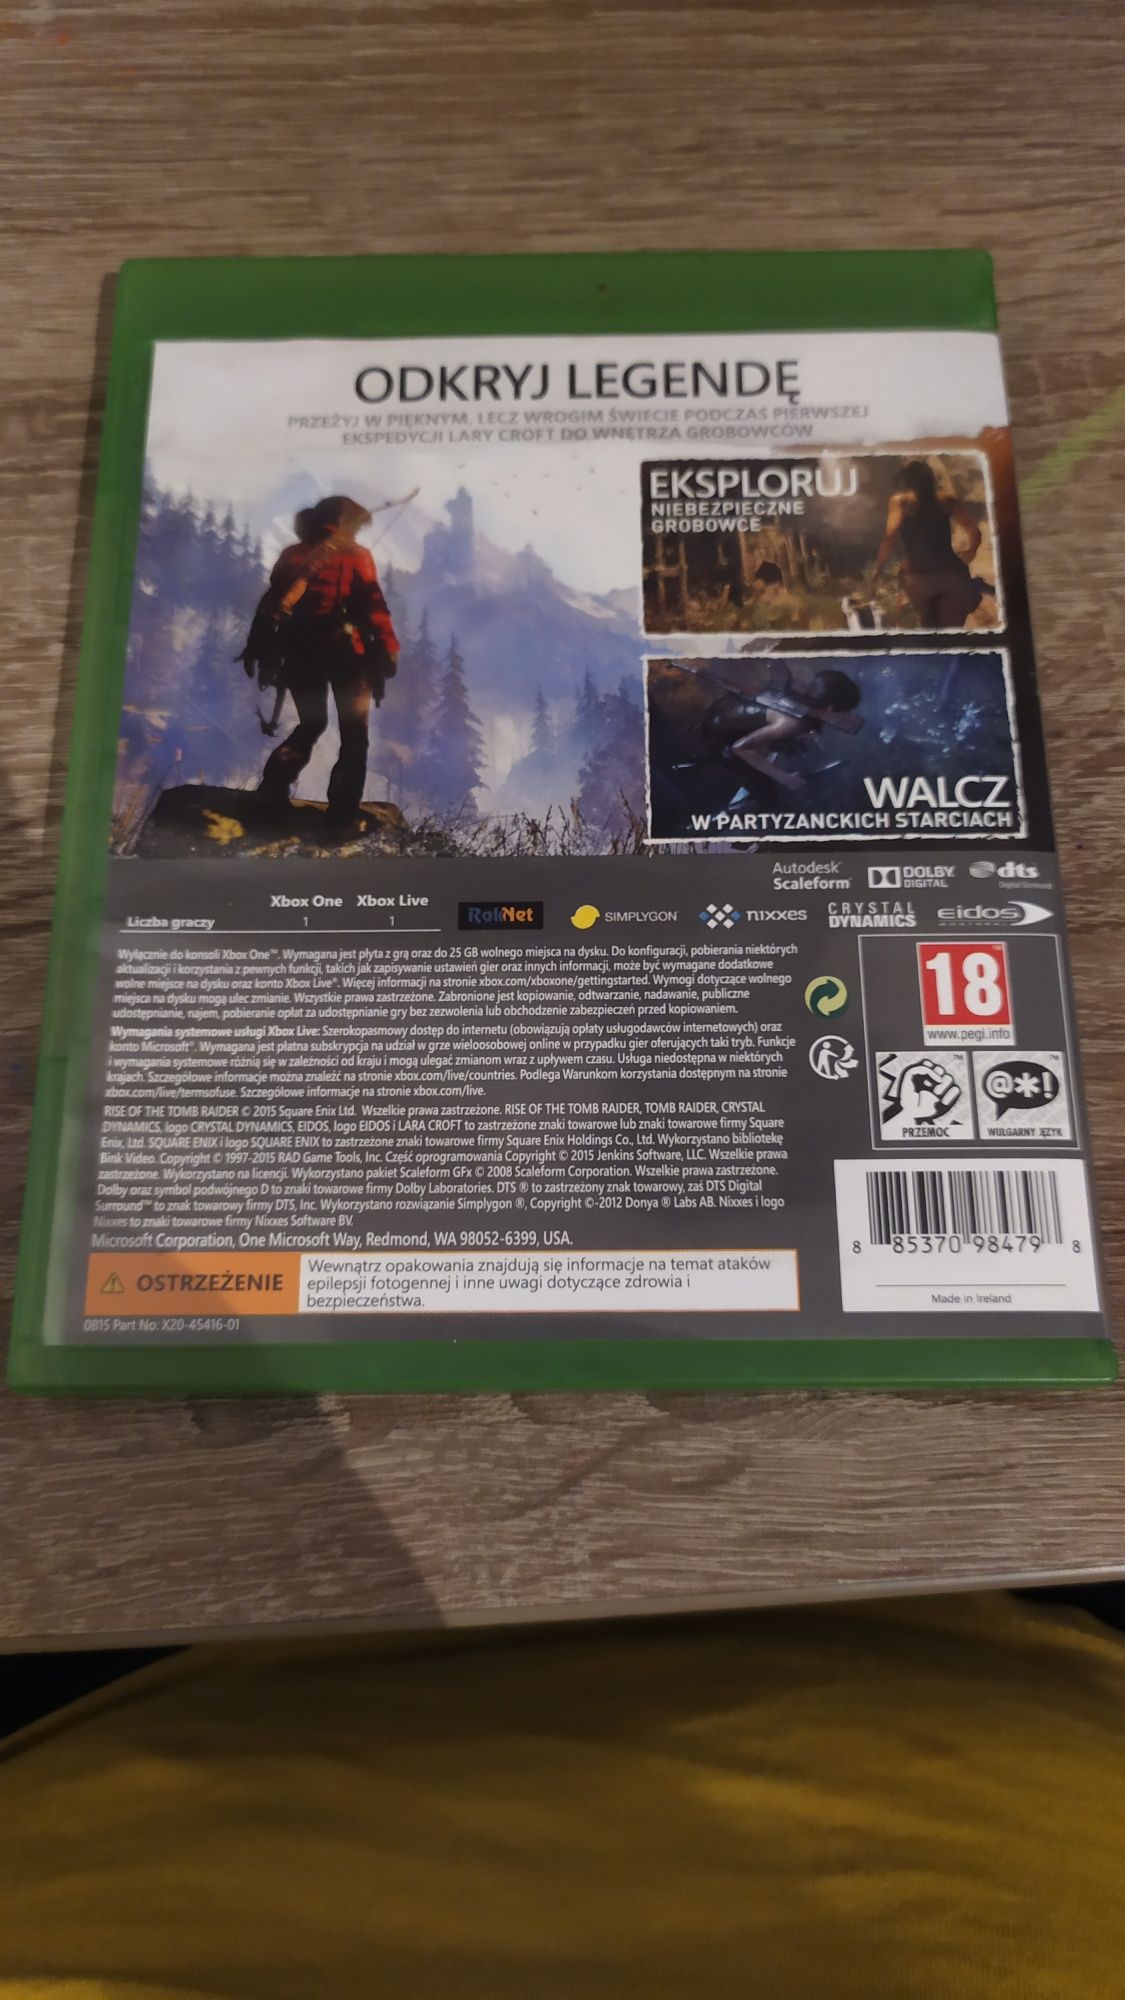 Rose of the Tomb Raider xbox one